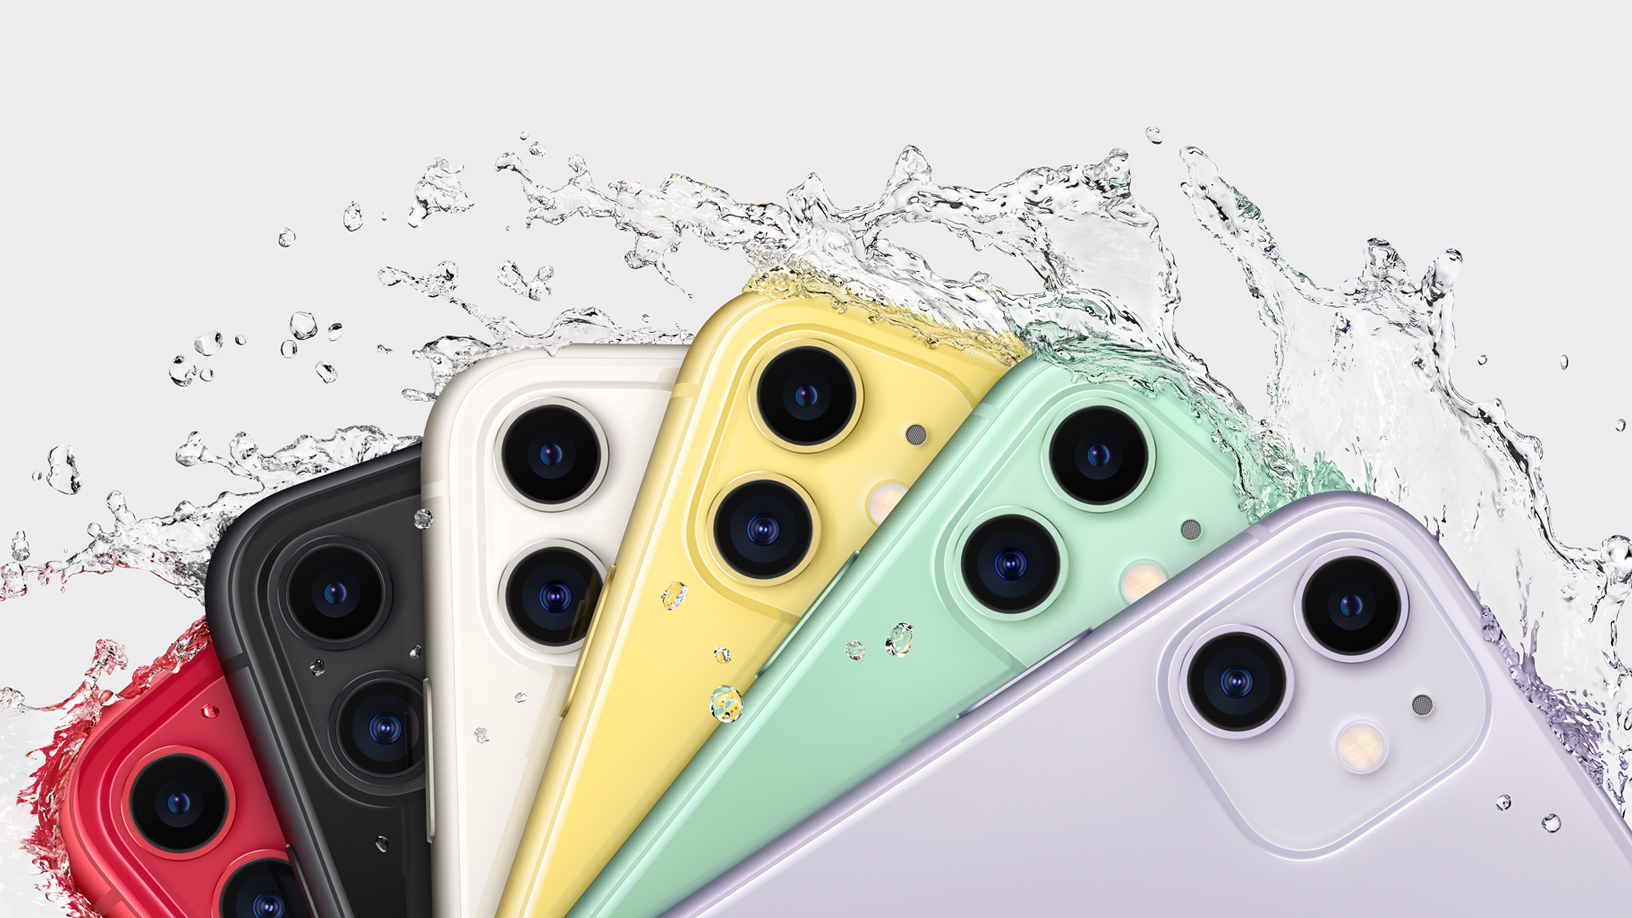 iphone 11 features camera and water resistance 